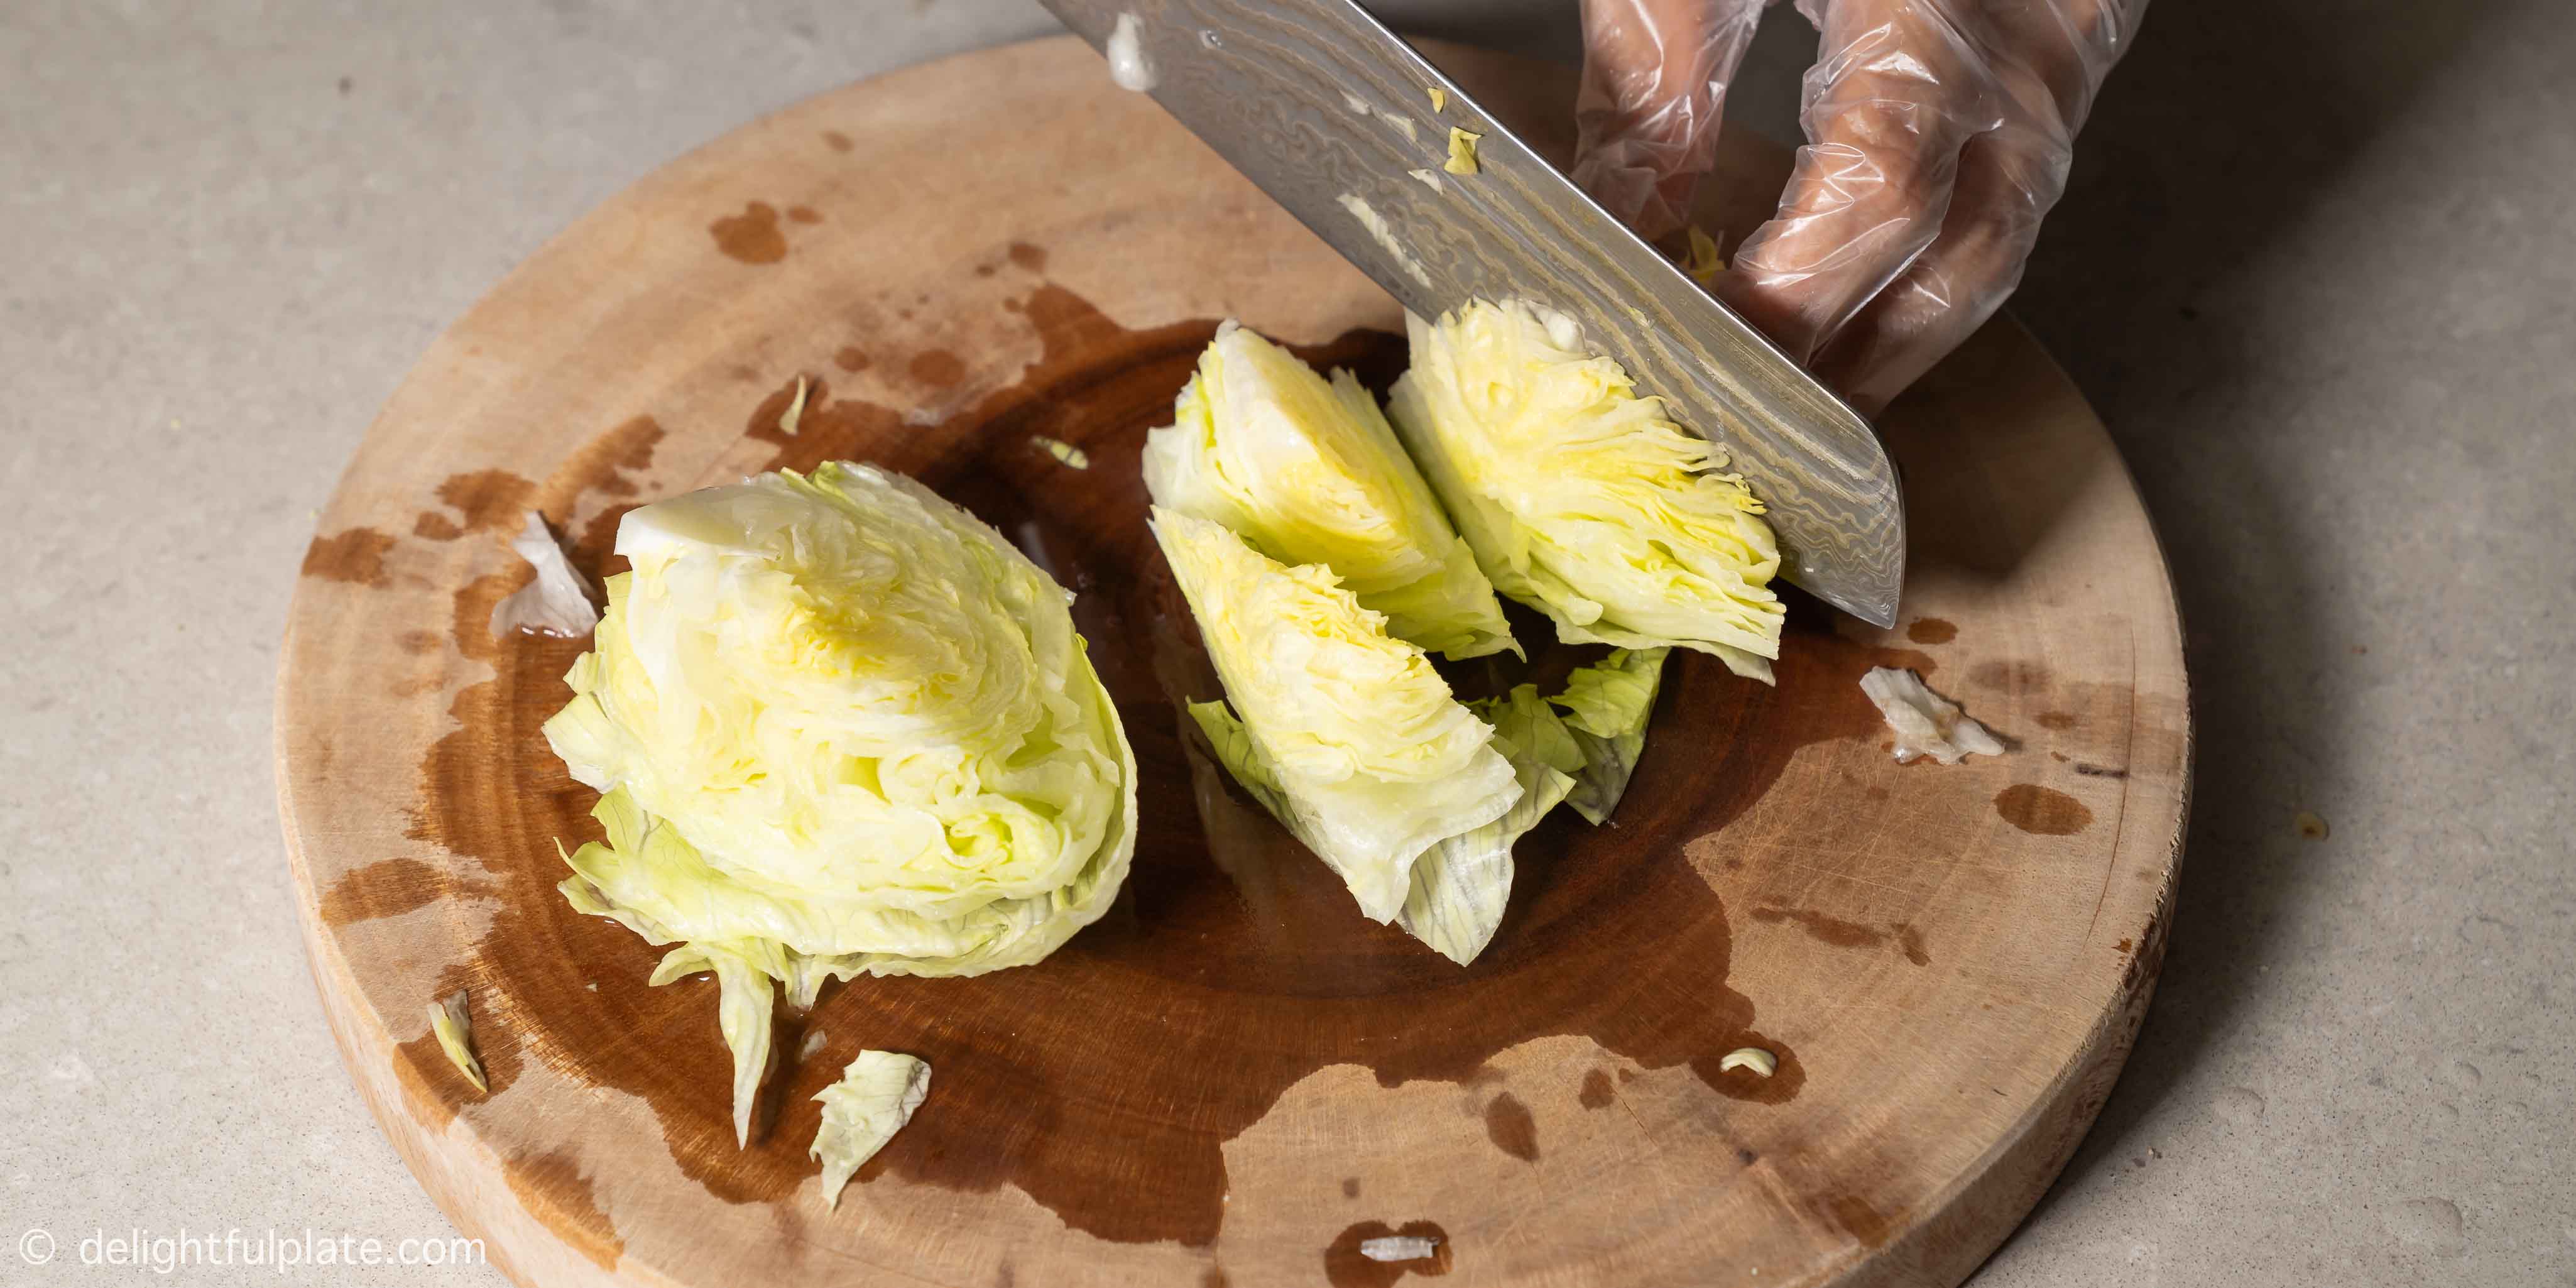 cutting iceberg lettuce into small pieces